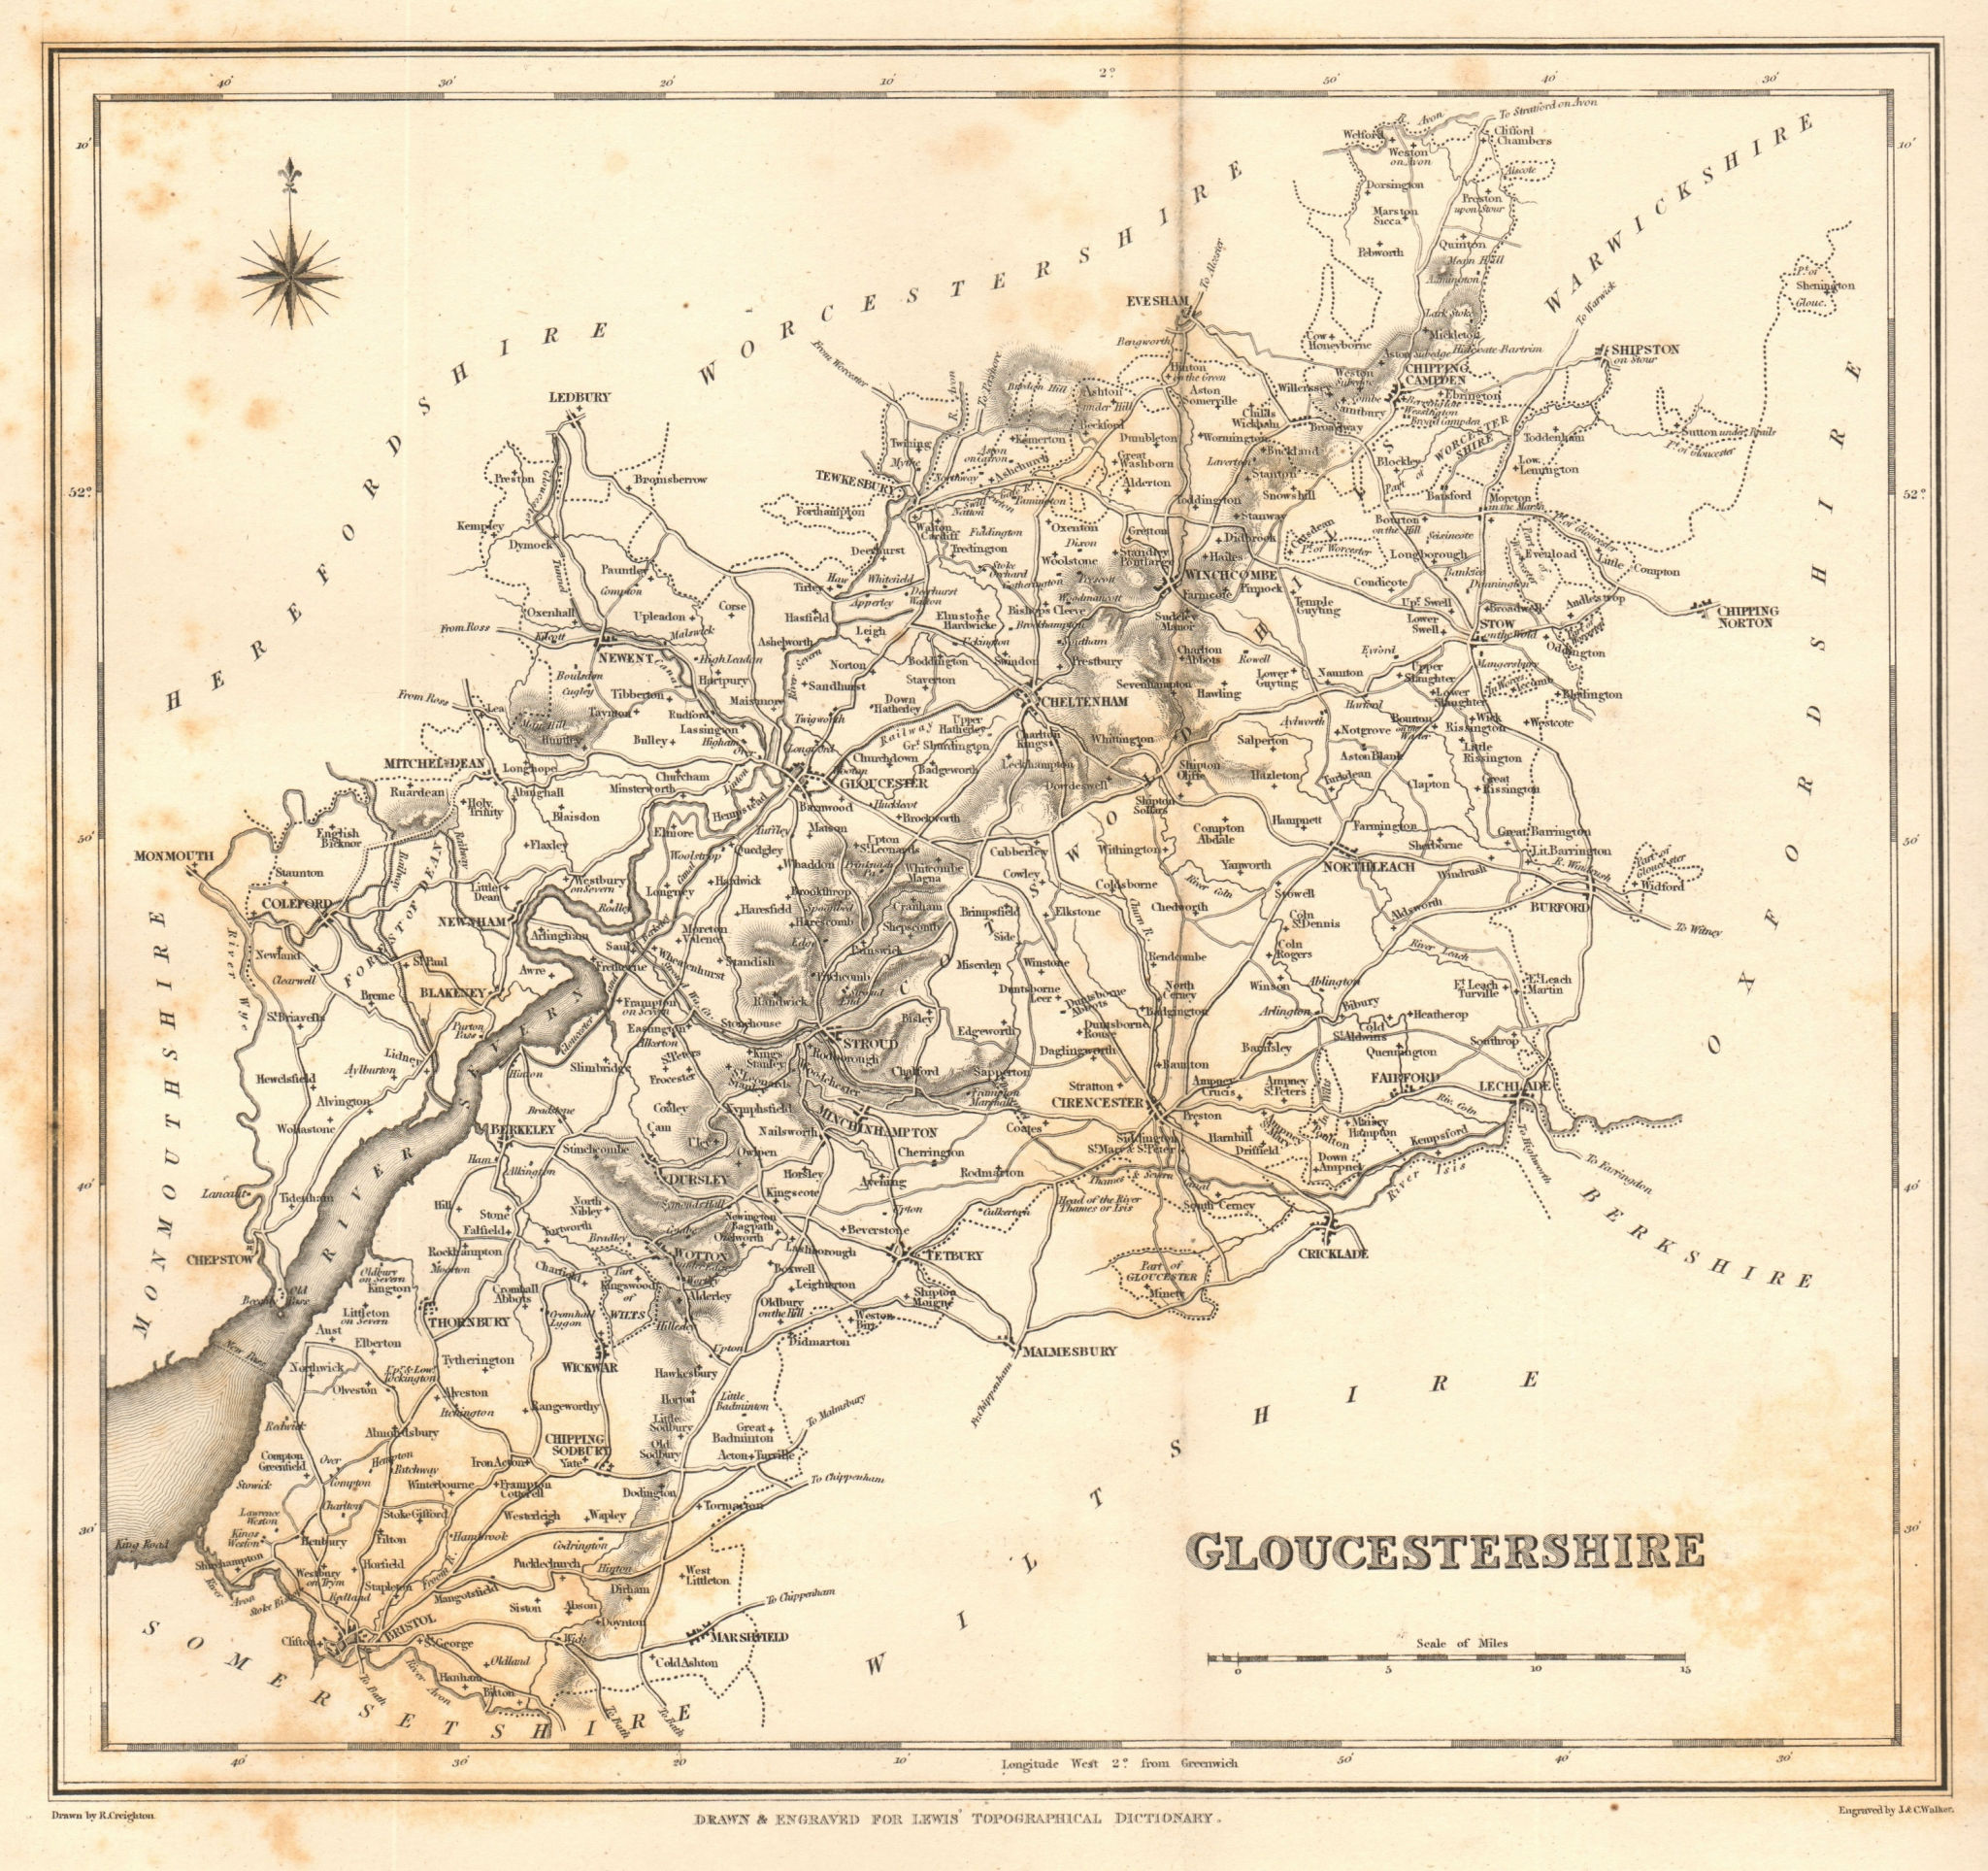 Associate Product Antique county map of GLOUCESTERSHIRE by Walker & Creighton for Lewis c1840